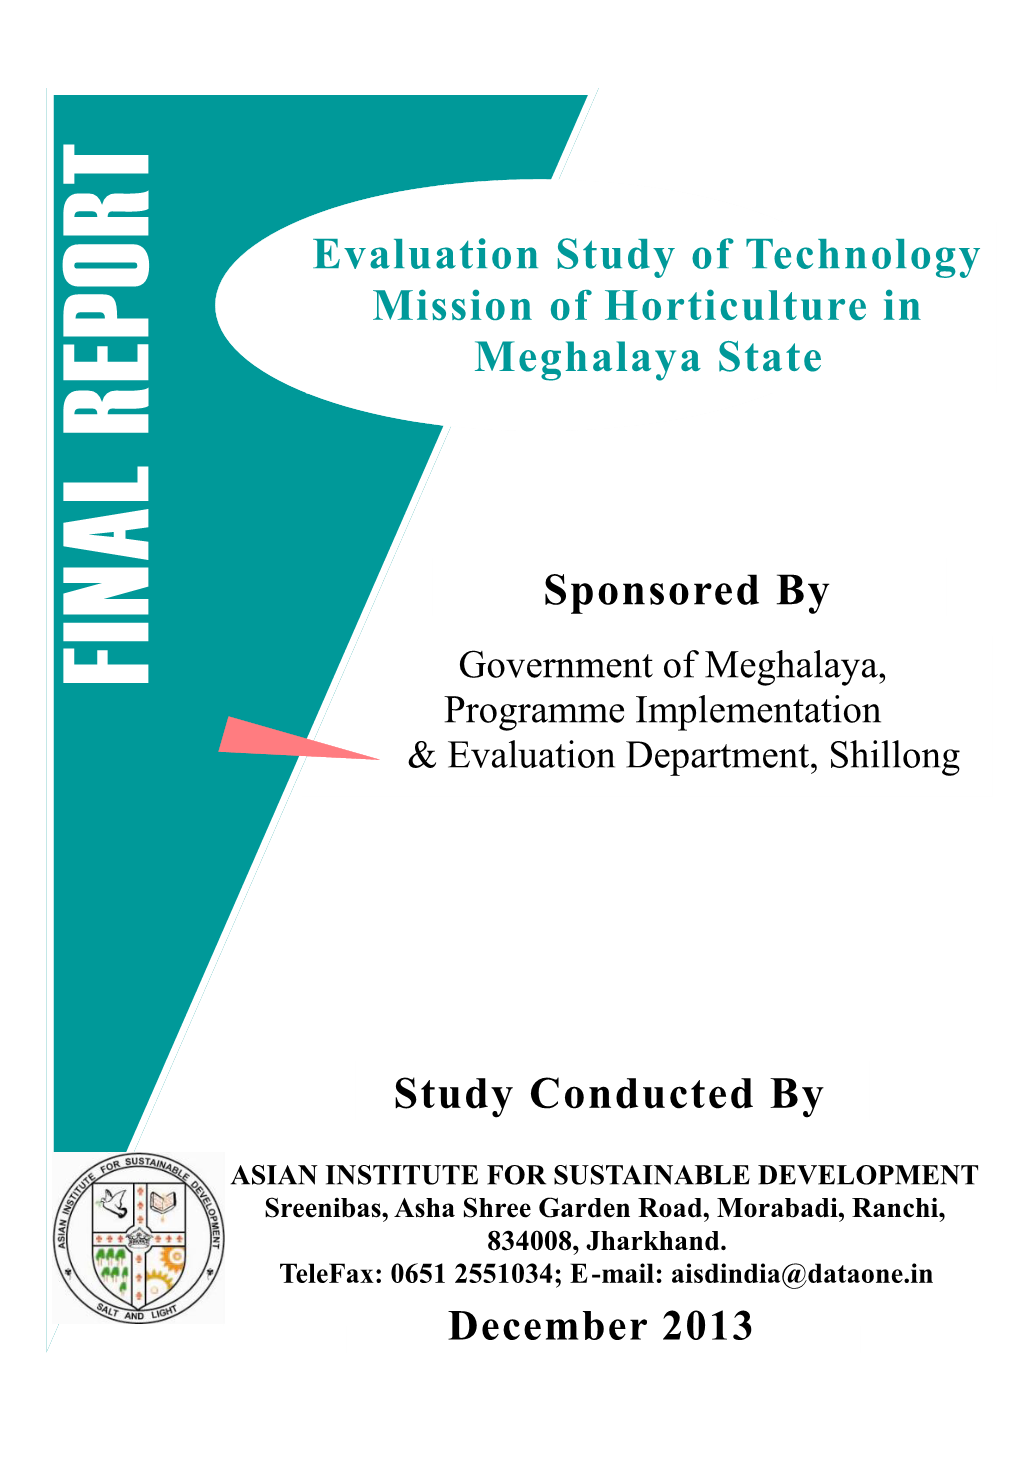 Sponsored by Evaluation Study of Technology Mission of Horticulture